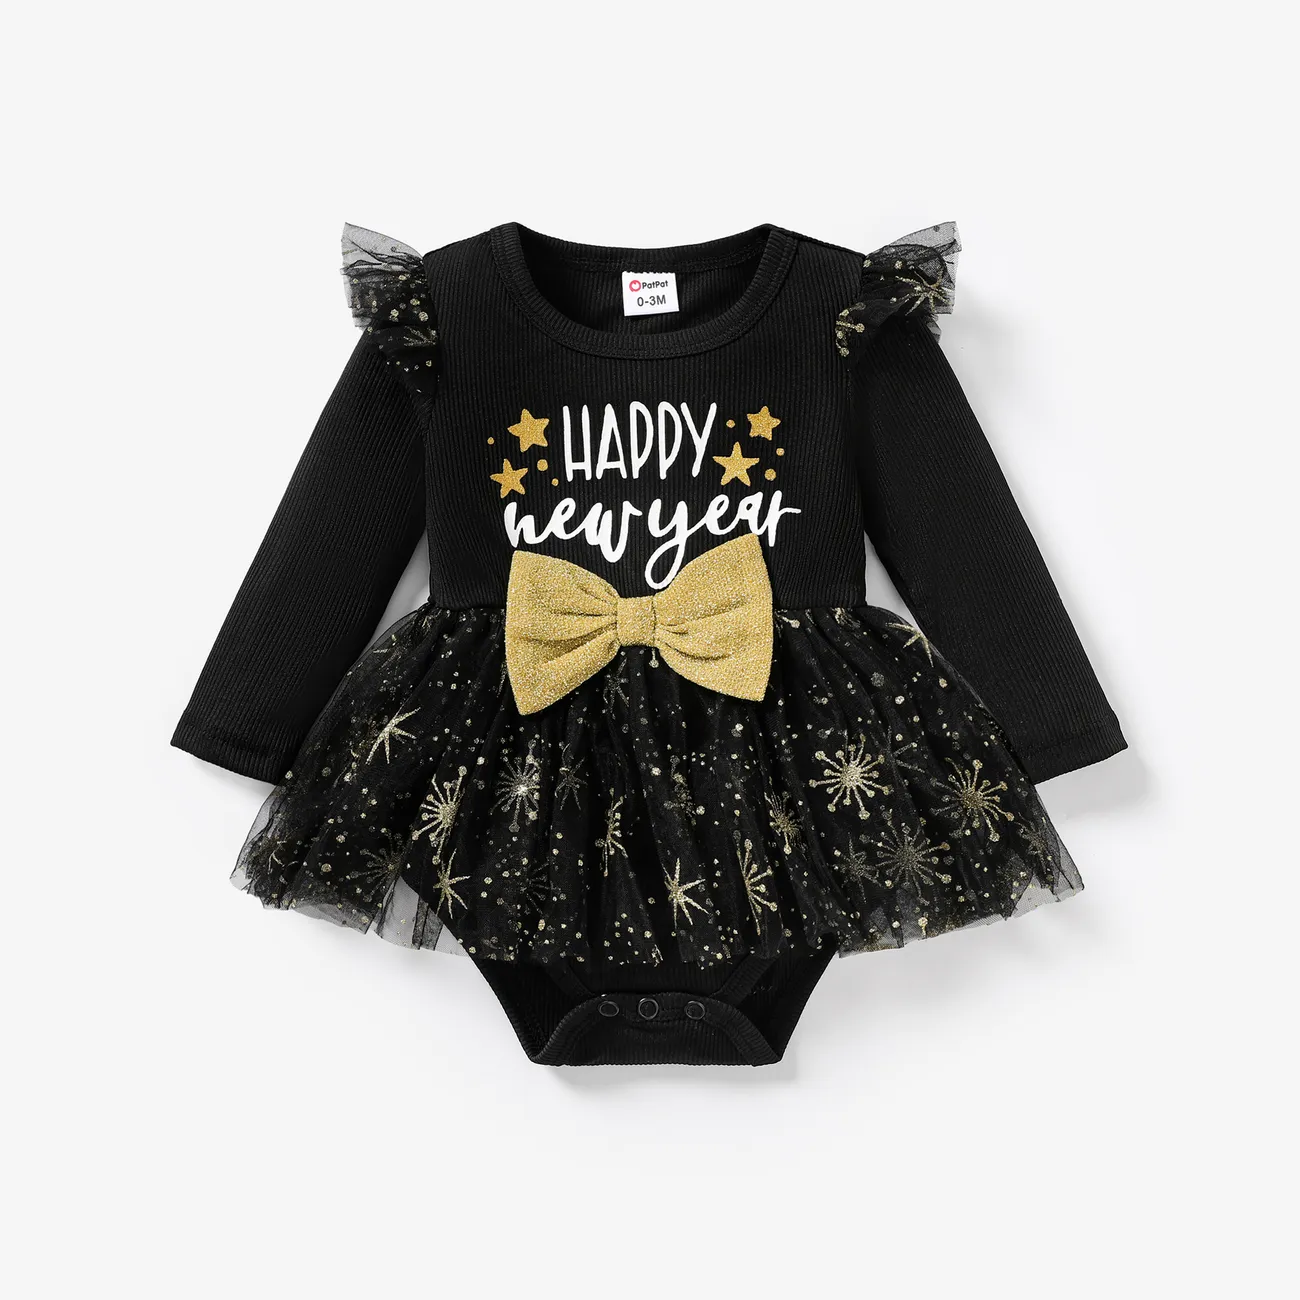 Baby Girl Sweet New Year Pattern Butterfly Bow Ruffle Mesh Romper Black big image 1